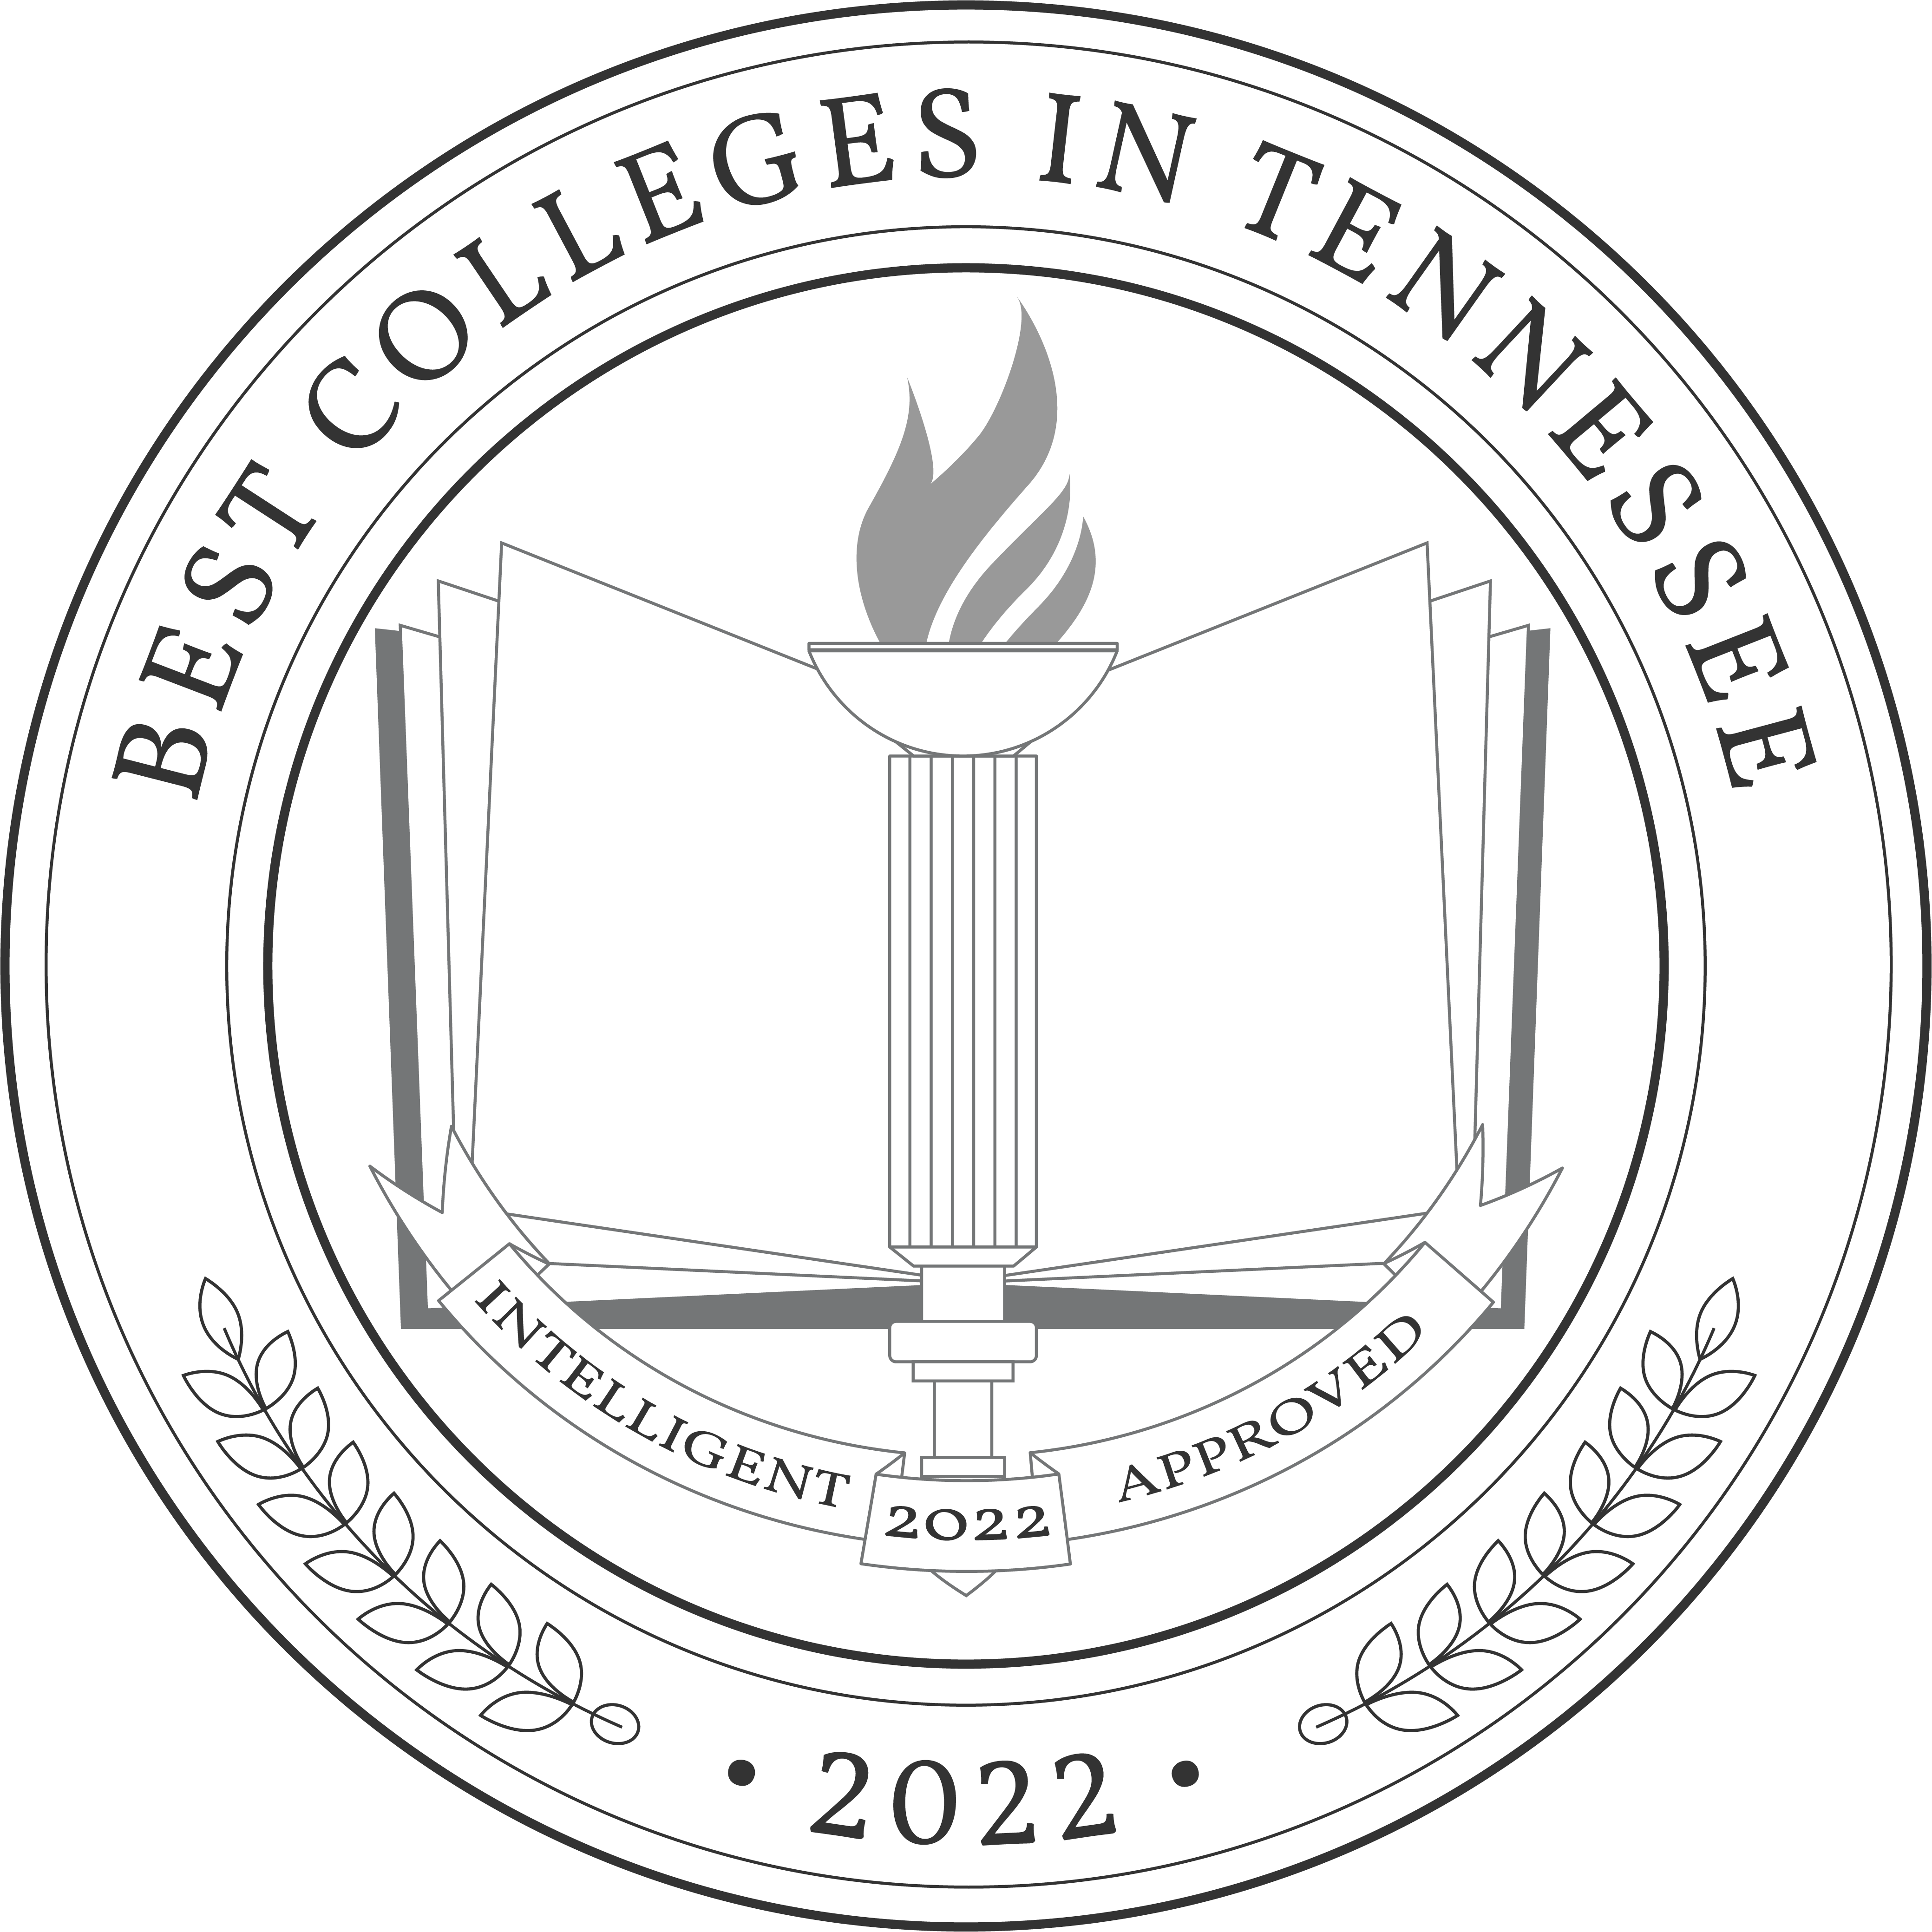 Best Colleges in Tennessee Badge